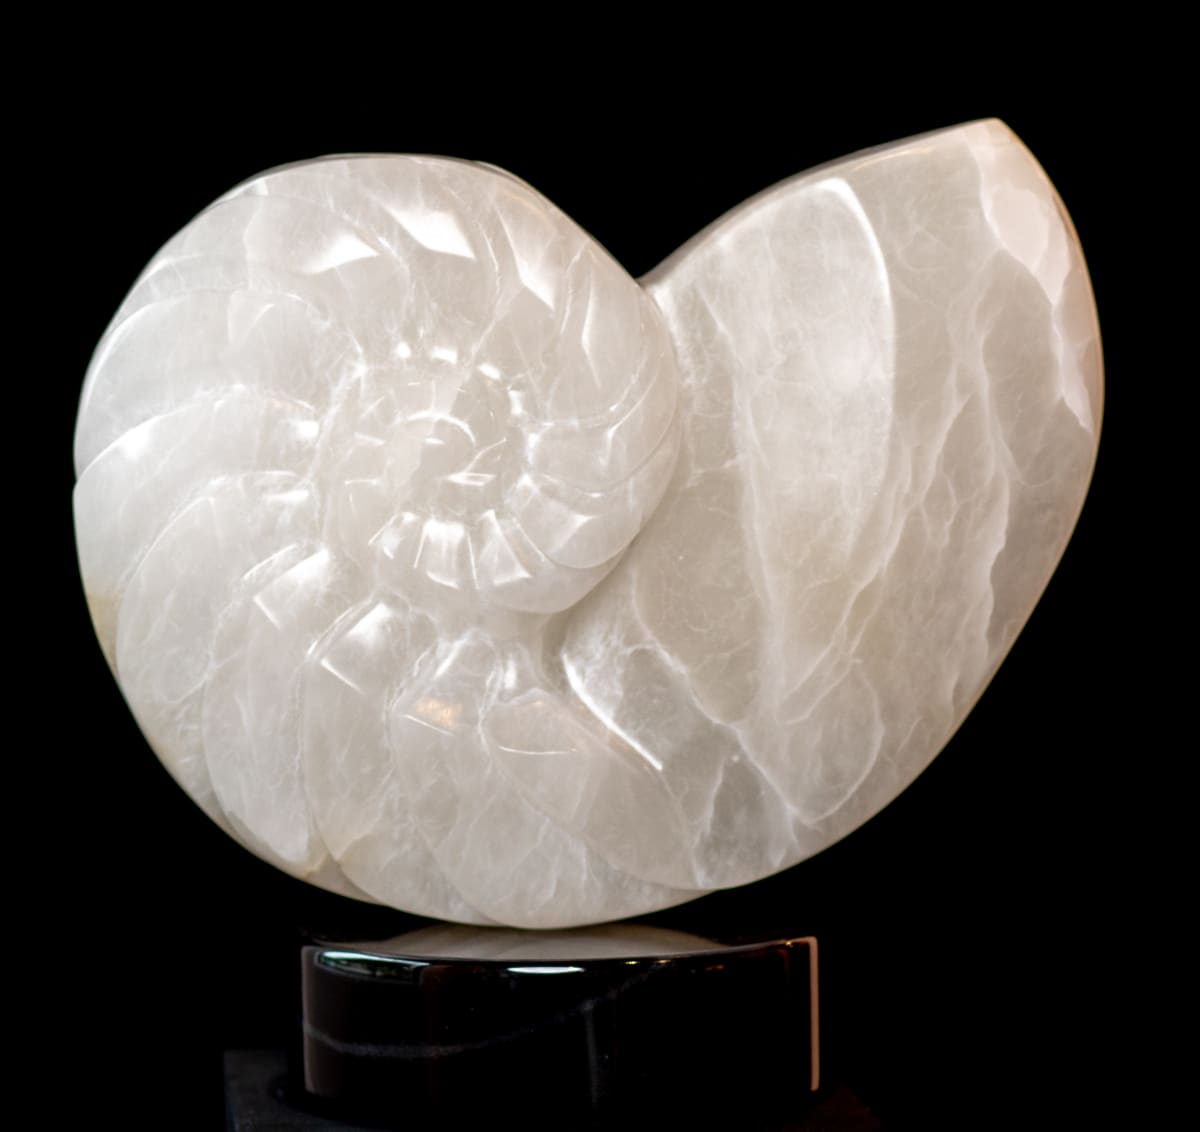 Nautilus III by Scott Gentry Sculpture  Image: Scott Gentry Sculpture. "Nautilus III" front view. Translucent Italian alabaster on black marble base. Measures 18H x 18W x 9D inches.